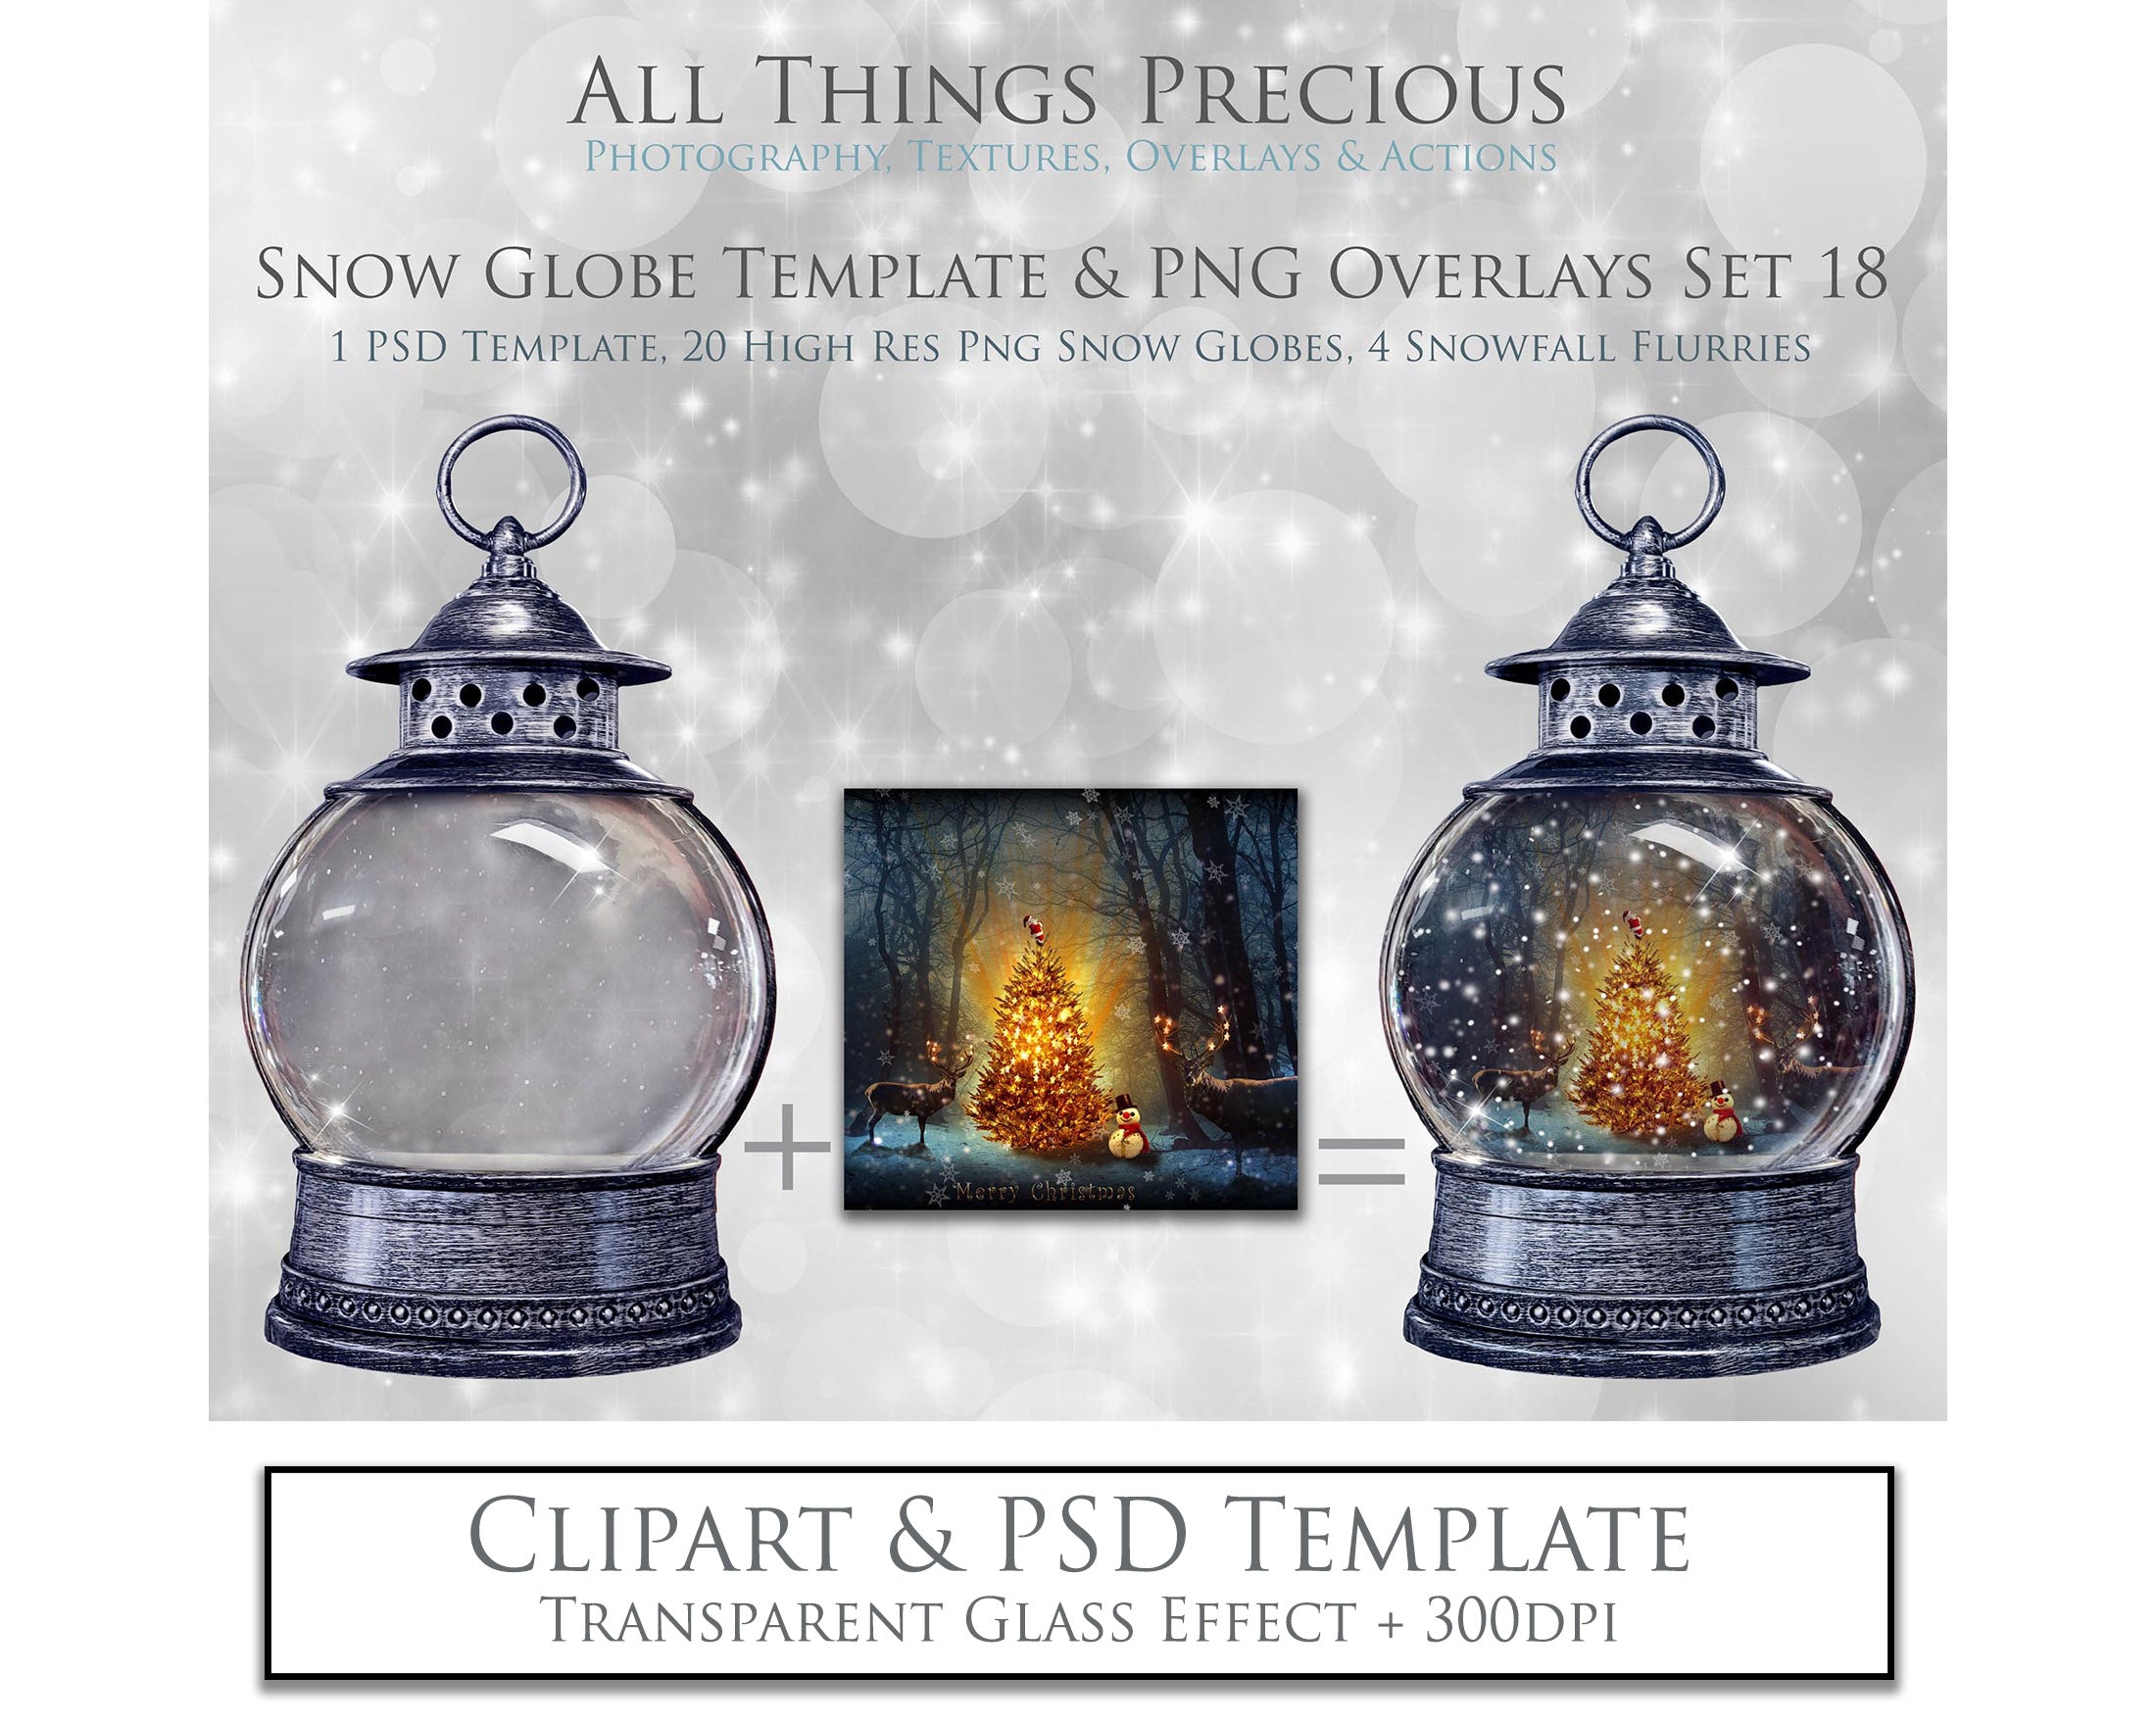 Digital Snow Globe Overlays, with snow flurries and a PSD Template included in the set. Transparent Glass Graphic Effects. Png Overlays with Photoshop Digital template file. High resolution, 300dpi. Visit the Website for more add ons, Actions, Overlays and Christmas Theme Products at ATP Textures.